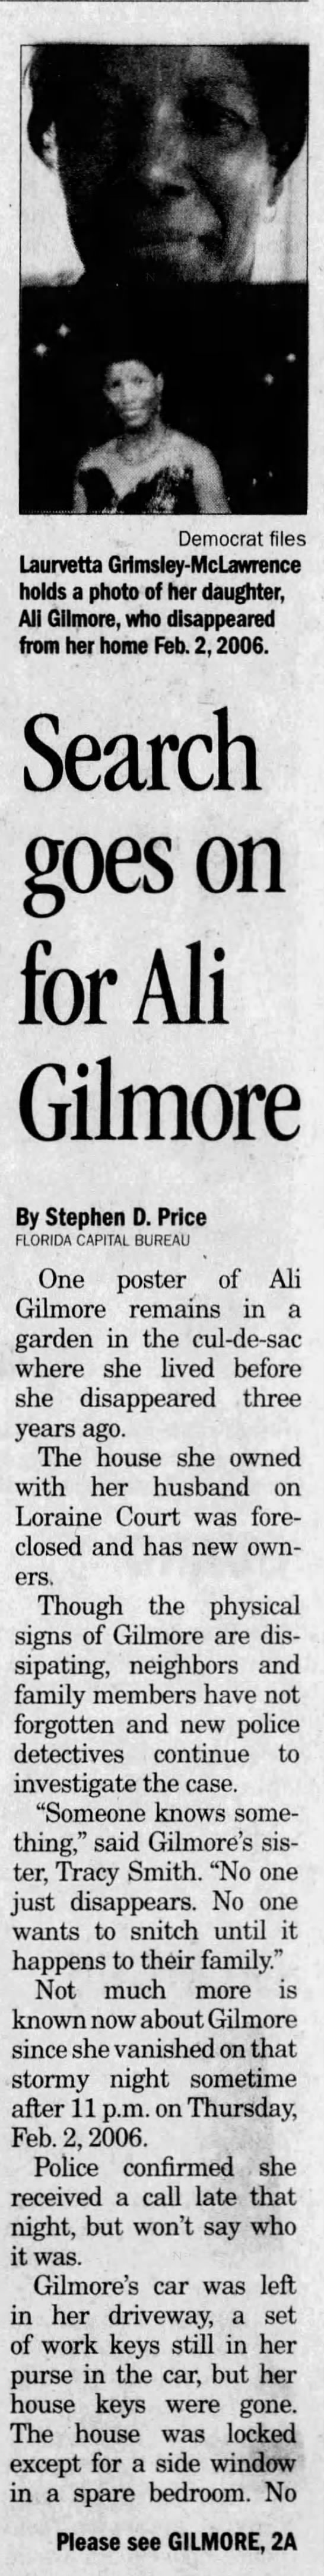 "Search goes on for Ali Gilmore," pt. 1 - 